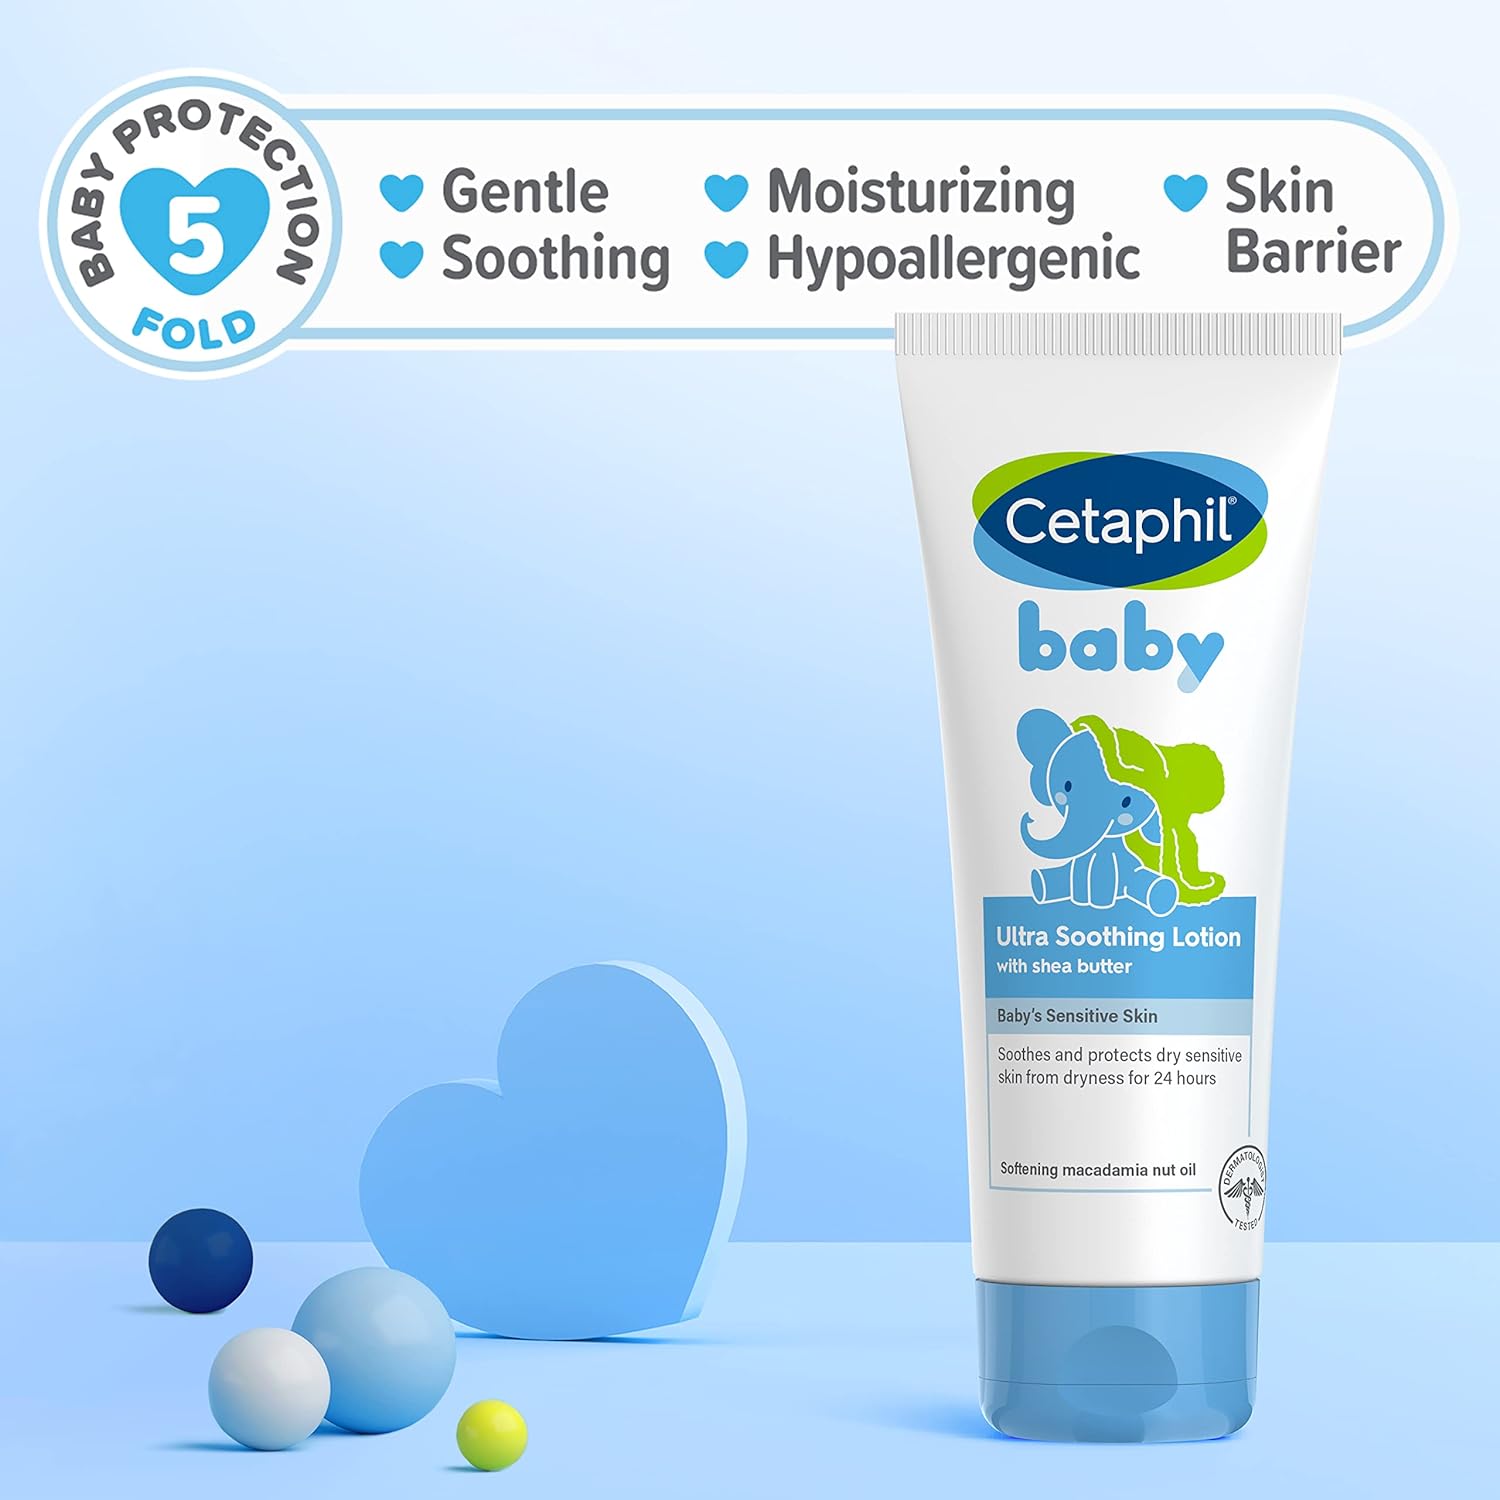 Cetaphil Baby Ultra Soothing Lotion with Shea Butter, Moisturize and Soothe Dry Skin,8 oz : Baby